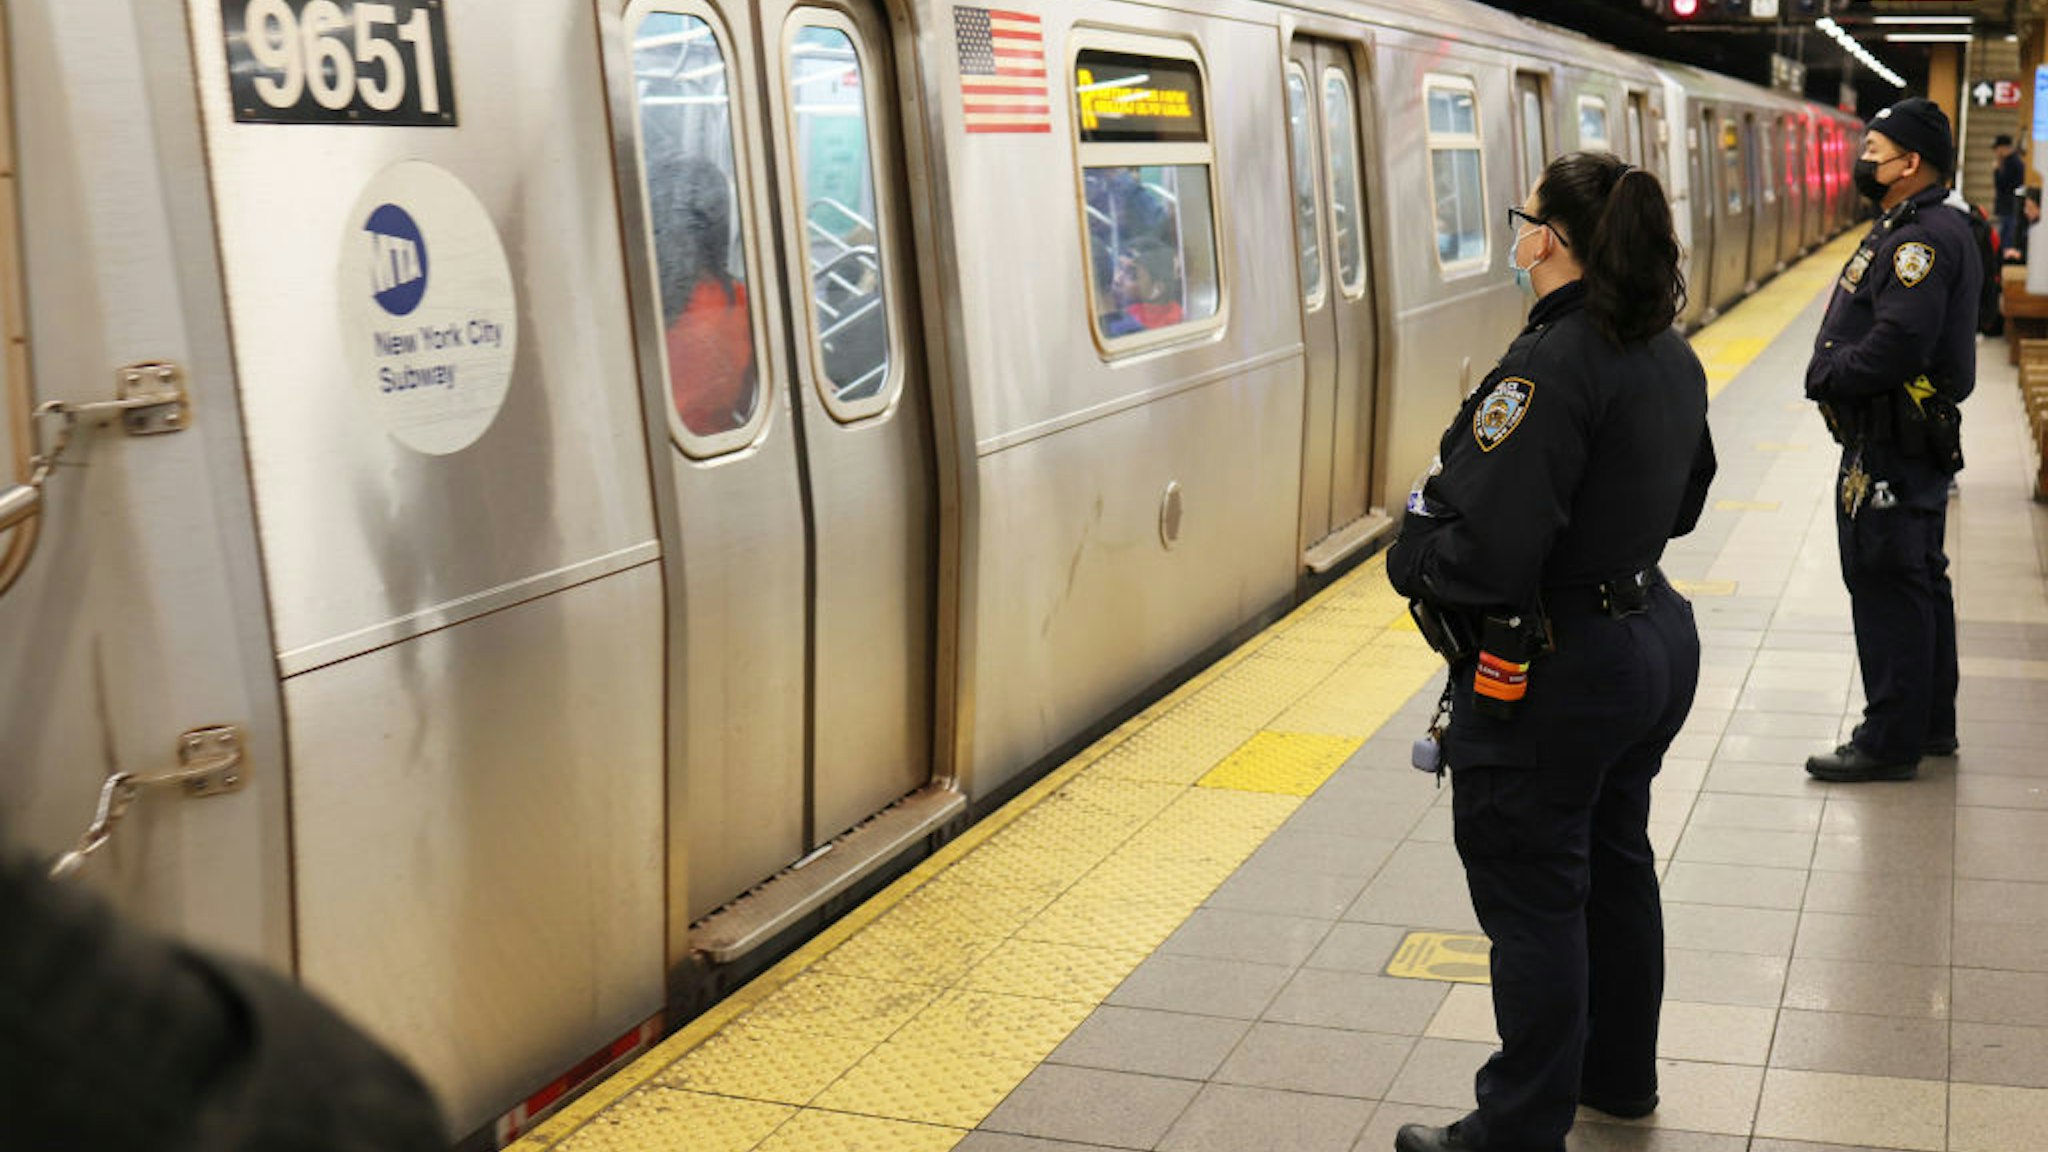 NYPD officers patrol the subway platform at the 36 Street subway station on April 13, 2022 in the Sunset Park neighborhood of Brooklyn in New York City.